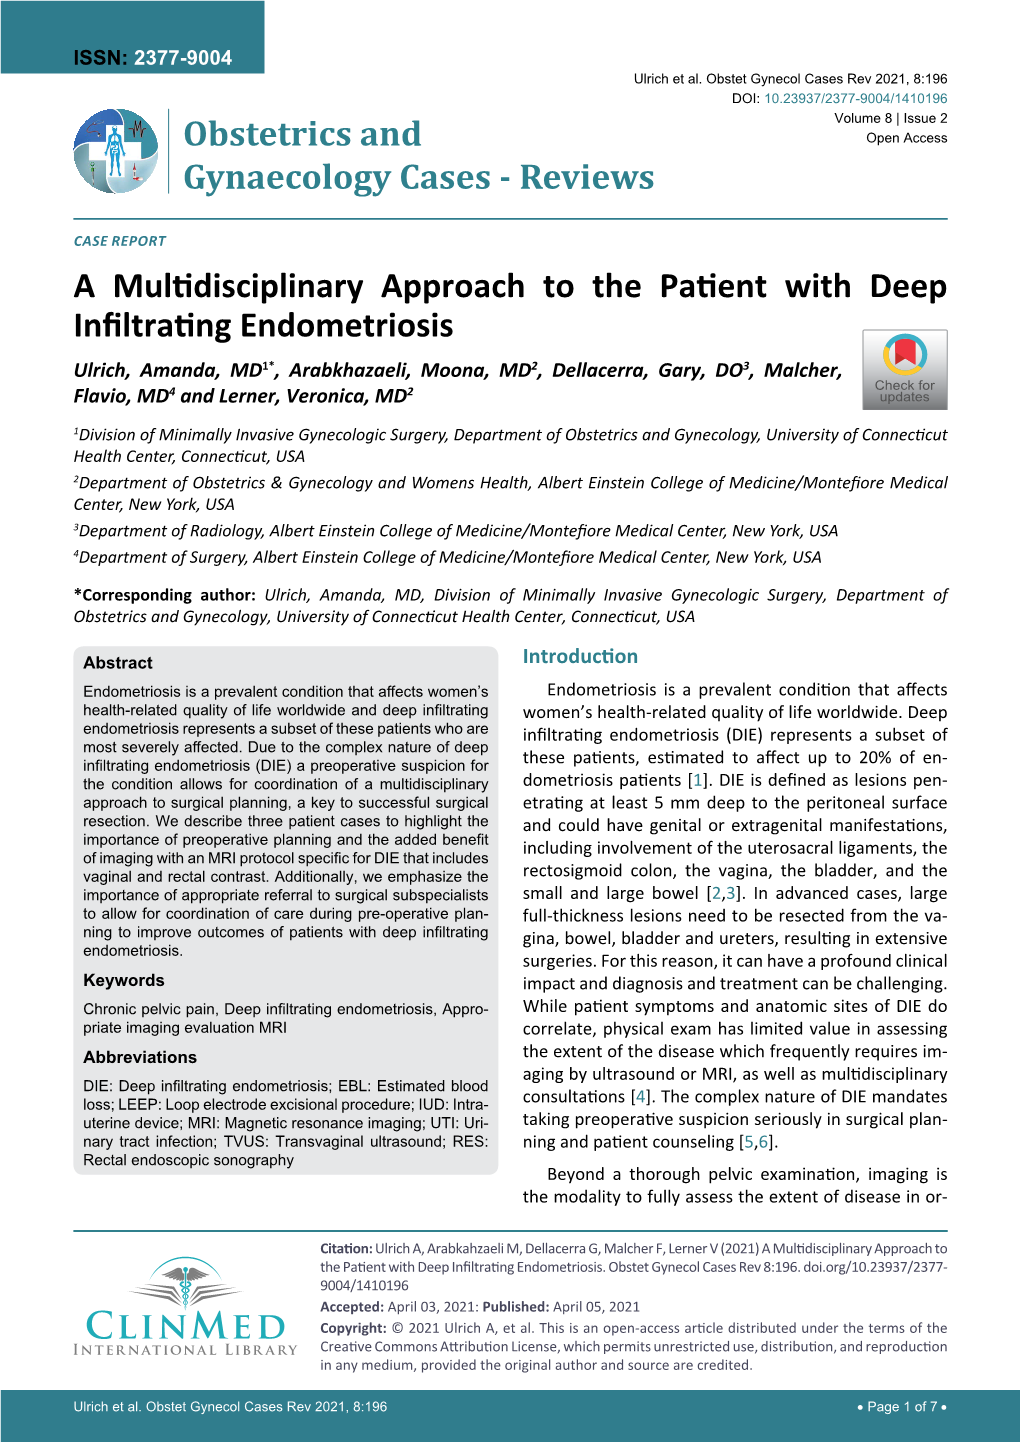 A Multidisciplinary Approach to the Patient with Deep Infiltrating